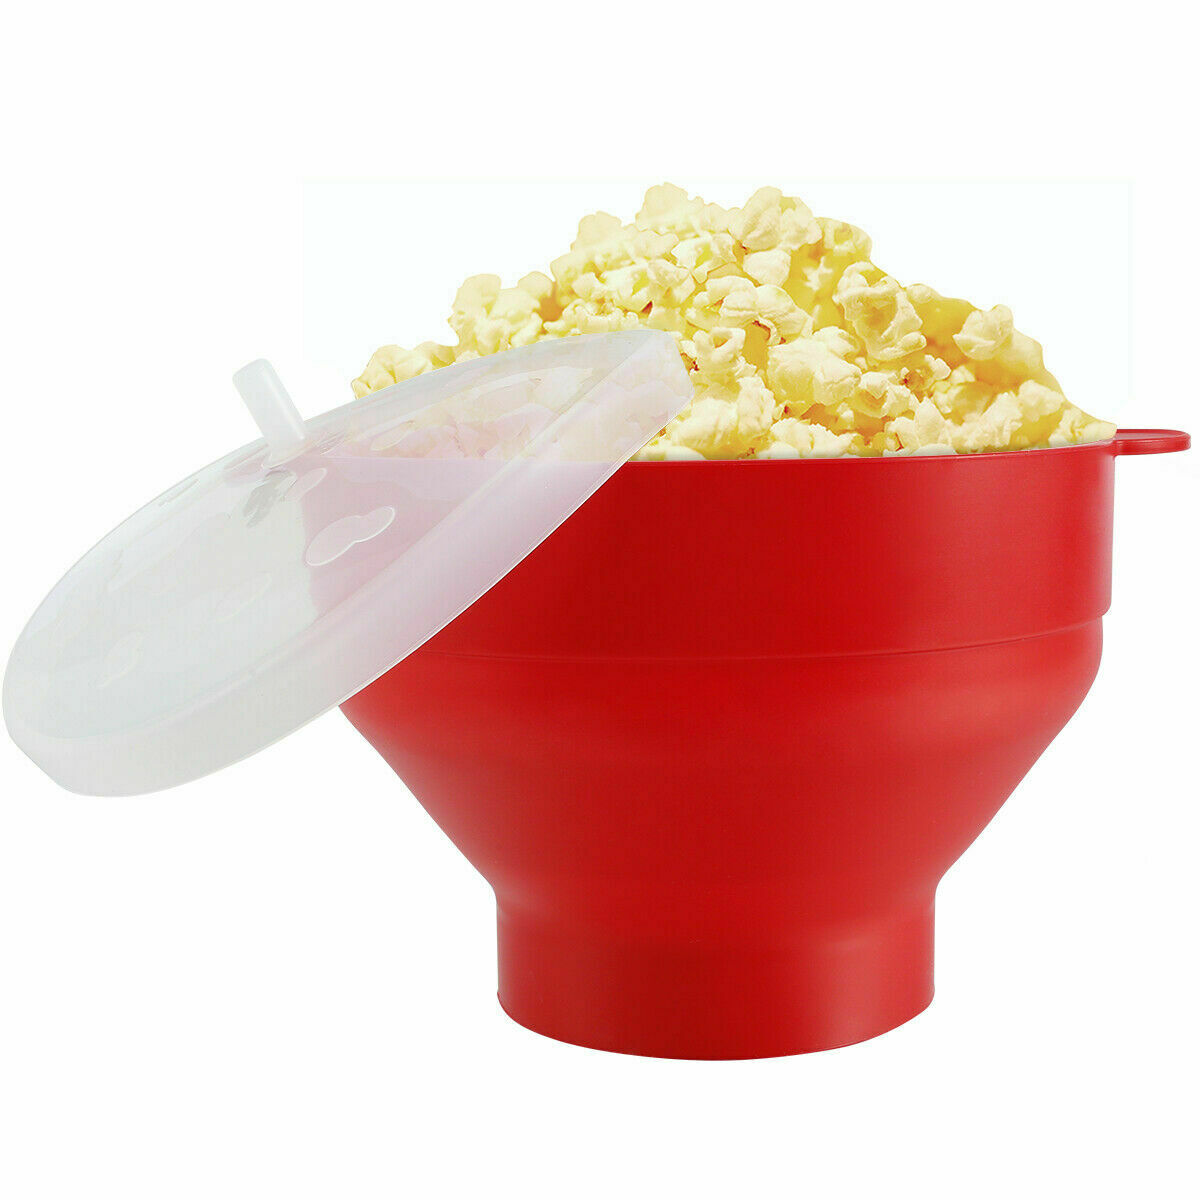 N/V Silicone popcorn bowl Microwave oven folded popcorn bucket Creative high temperature resistant large covered silicone bucket